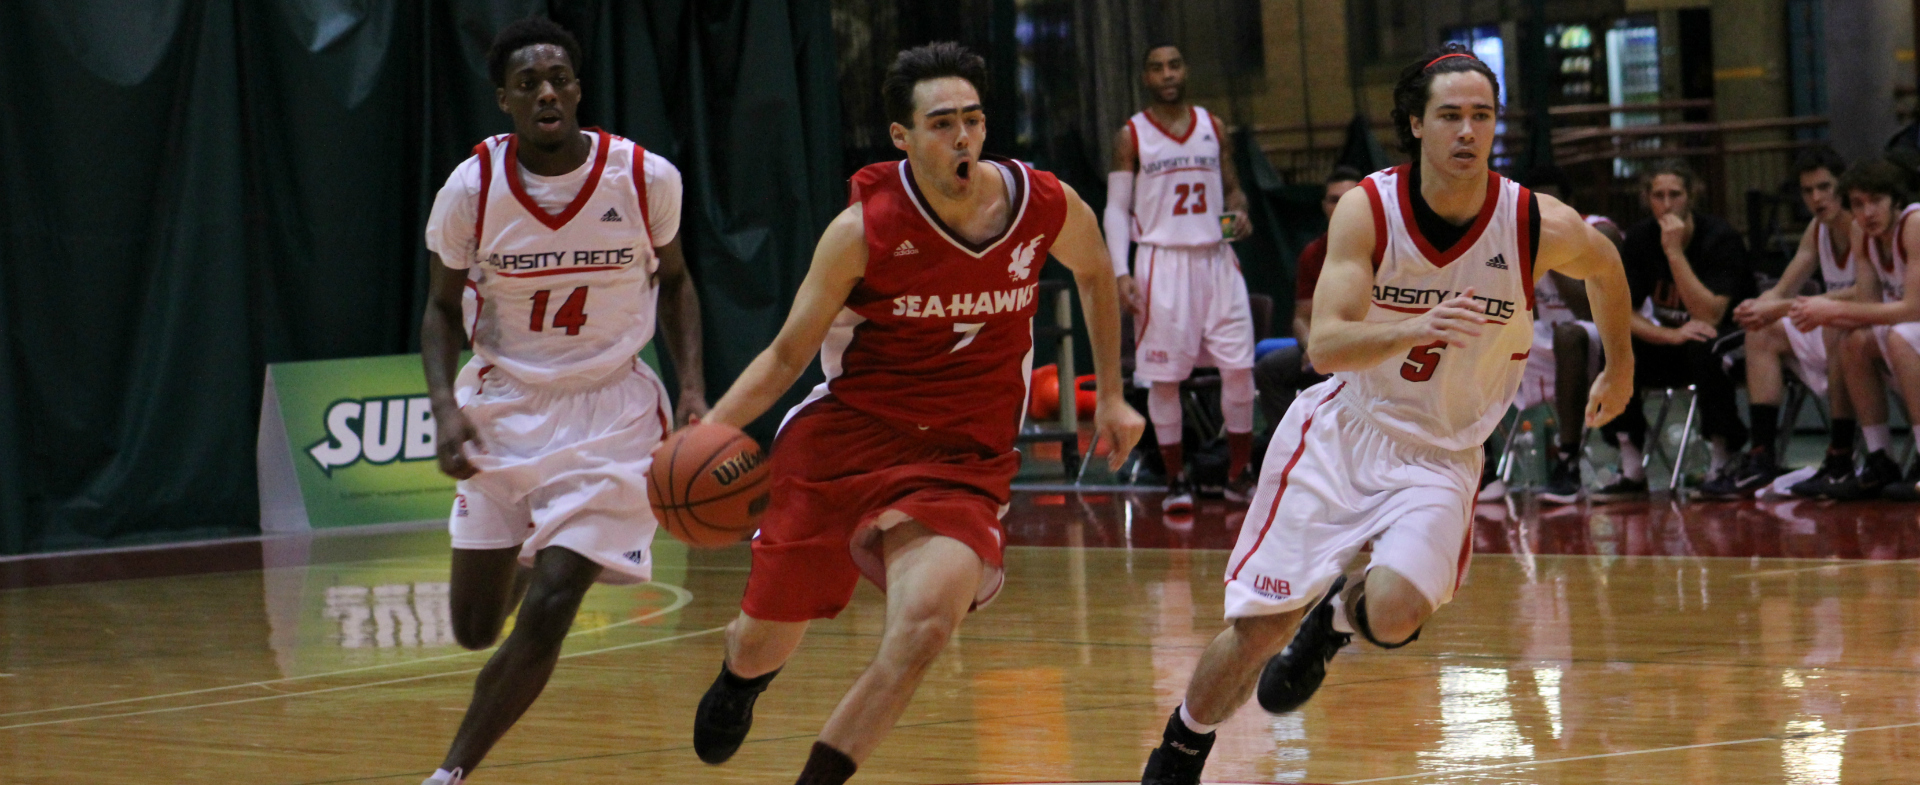 Sea-Hawks to battle Capers at home